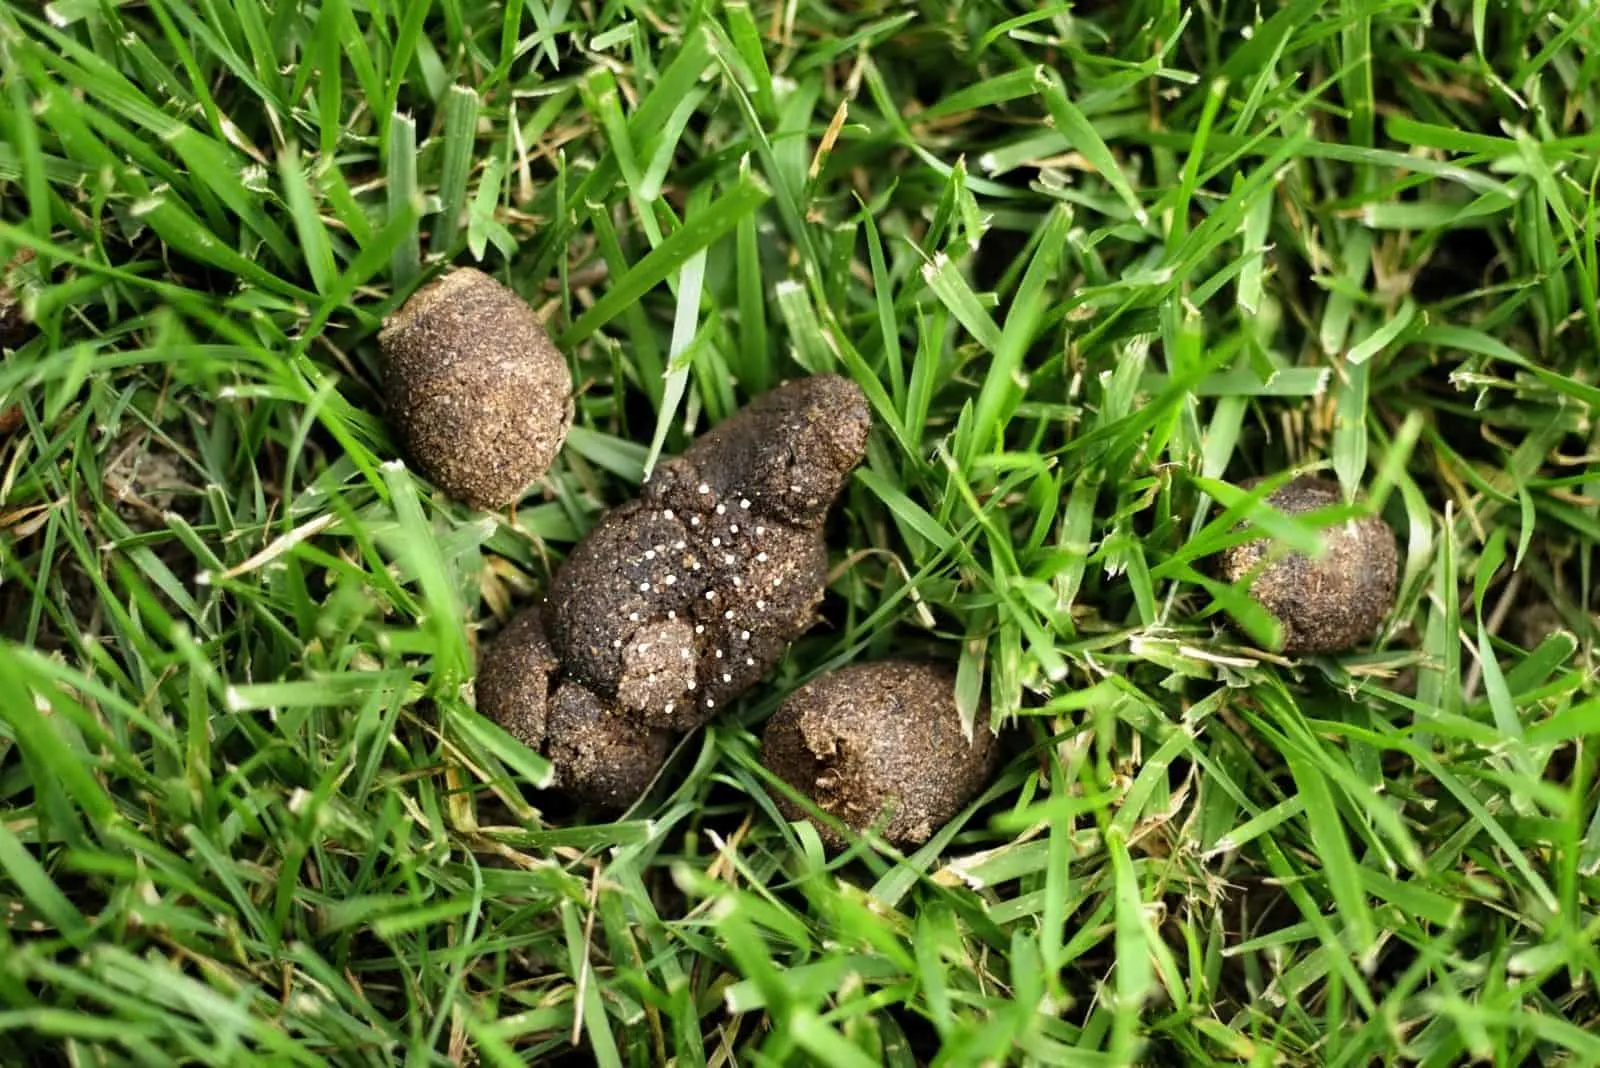 are roundworm eggs in dog poop visible